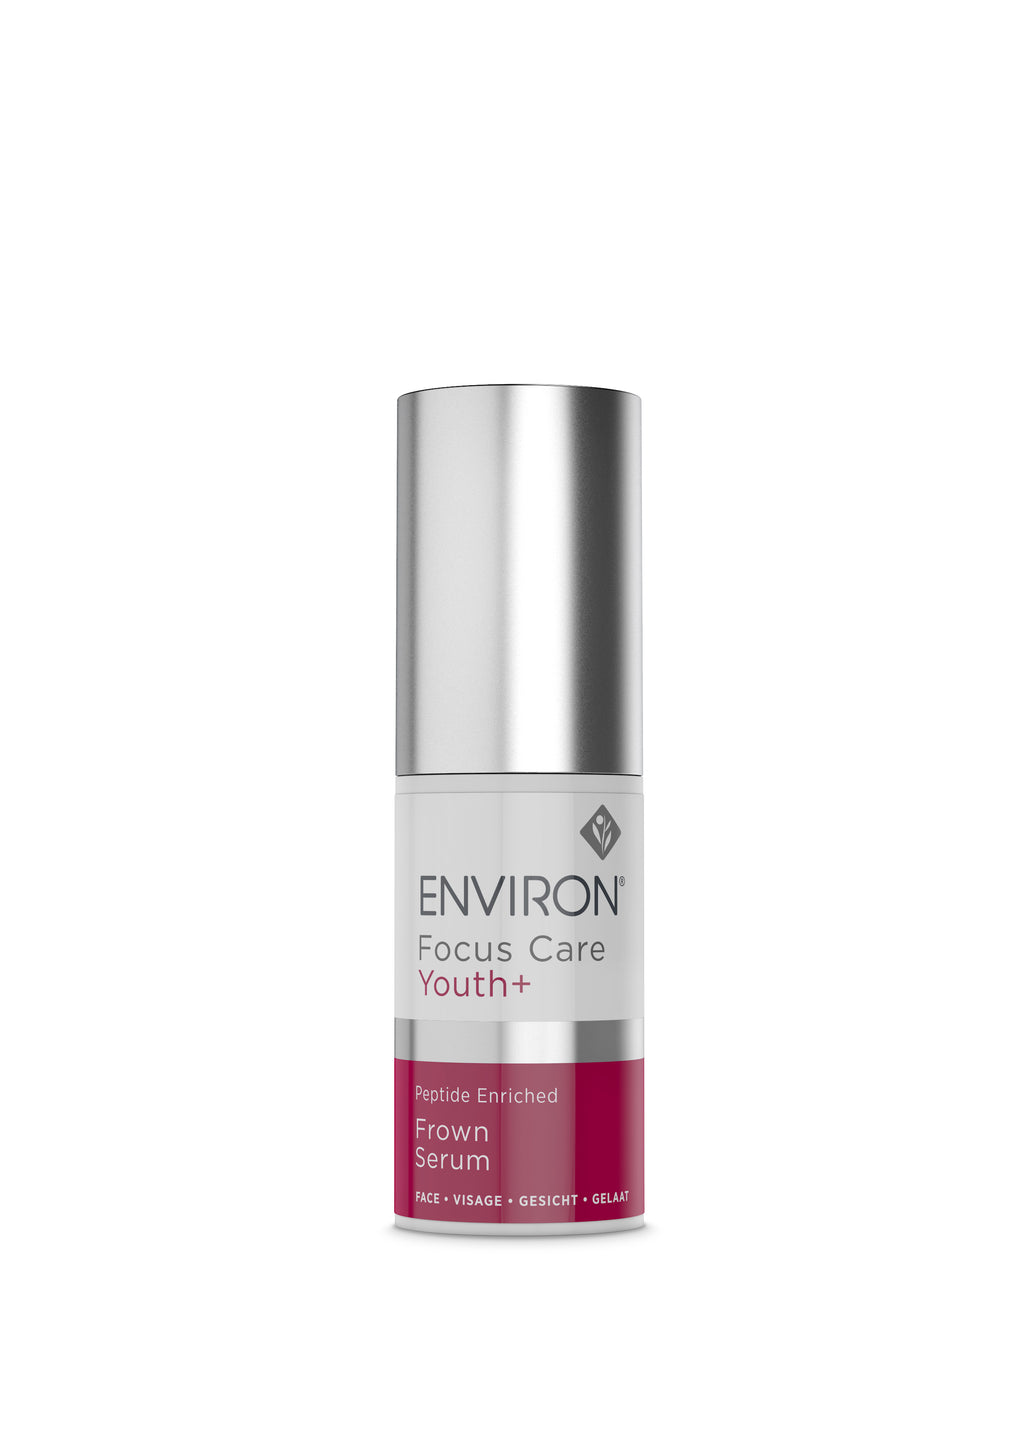 Peptide-Enriched Frown Serum